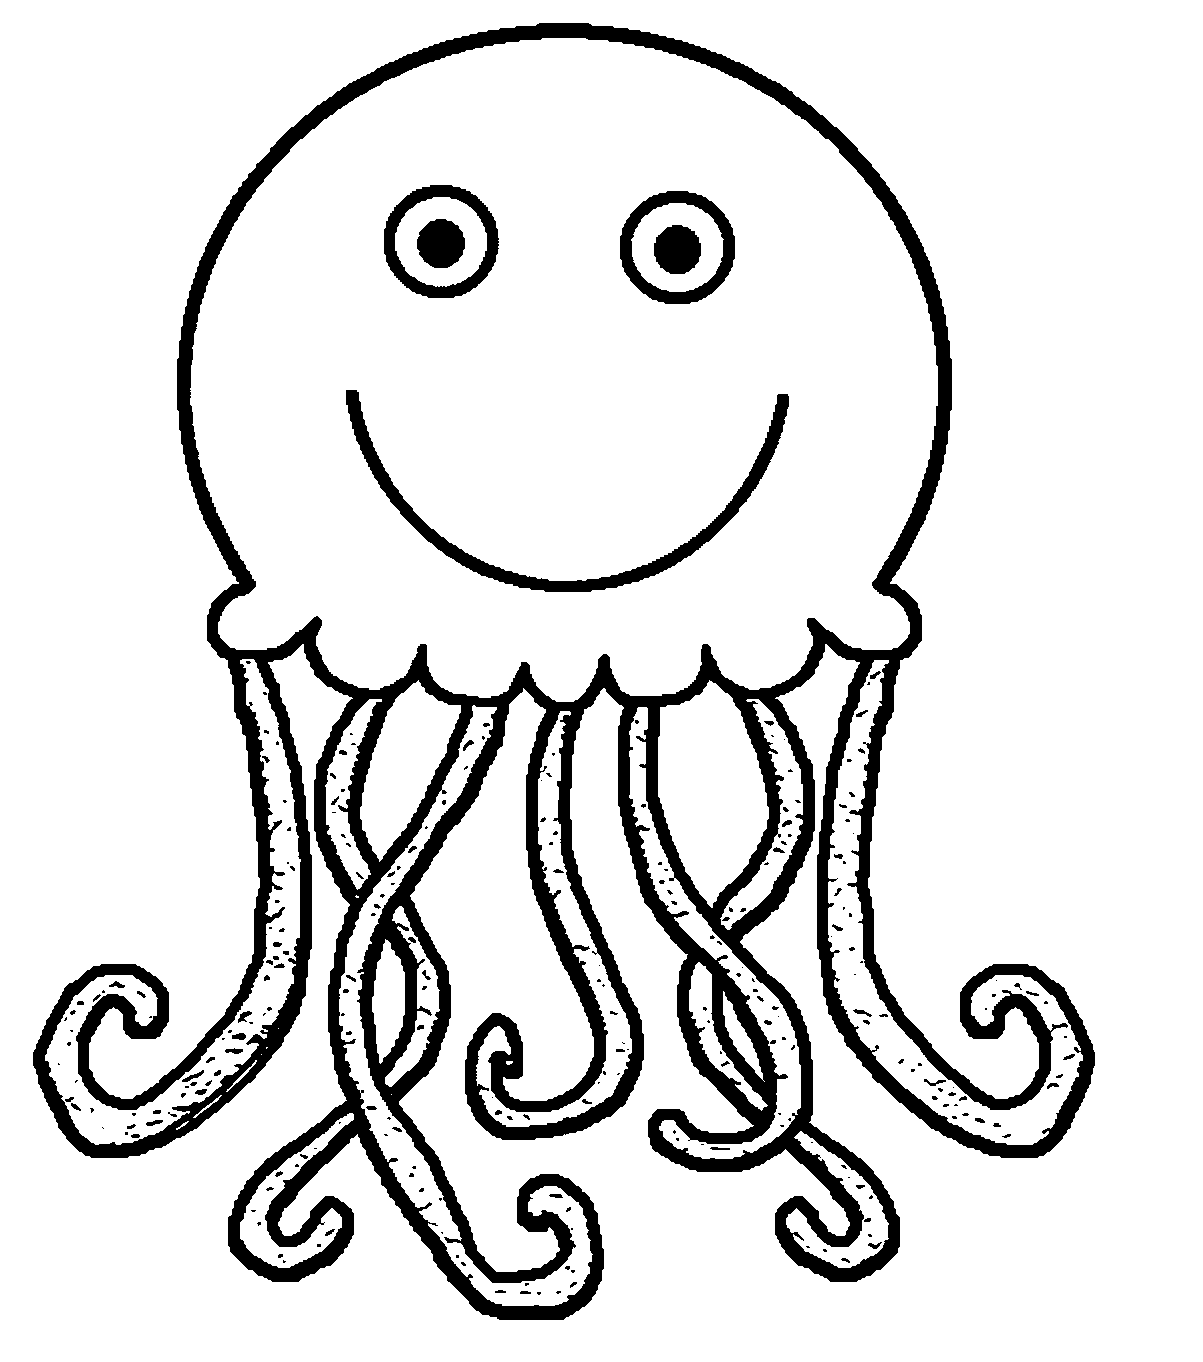 Jelly Fish Template Free / Easy Jellyfish Craft in 2020 Jellyfish